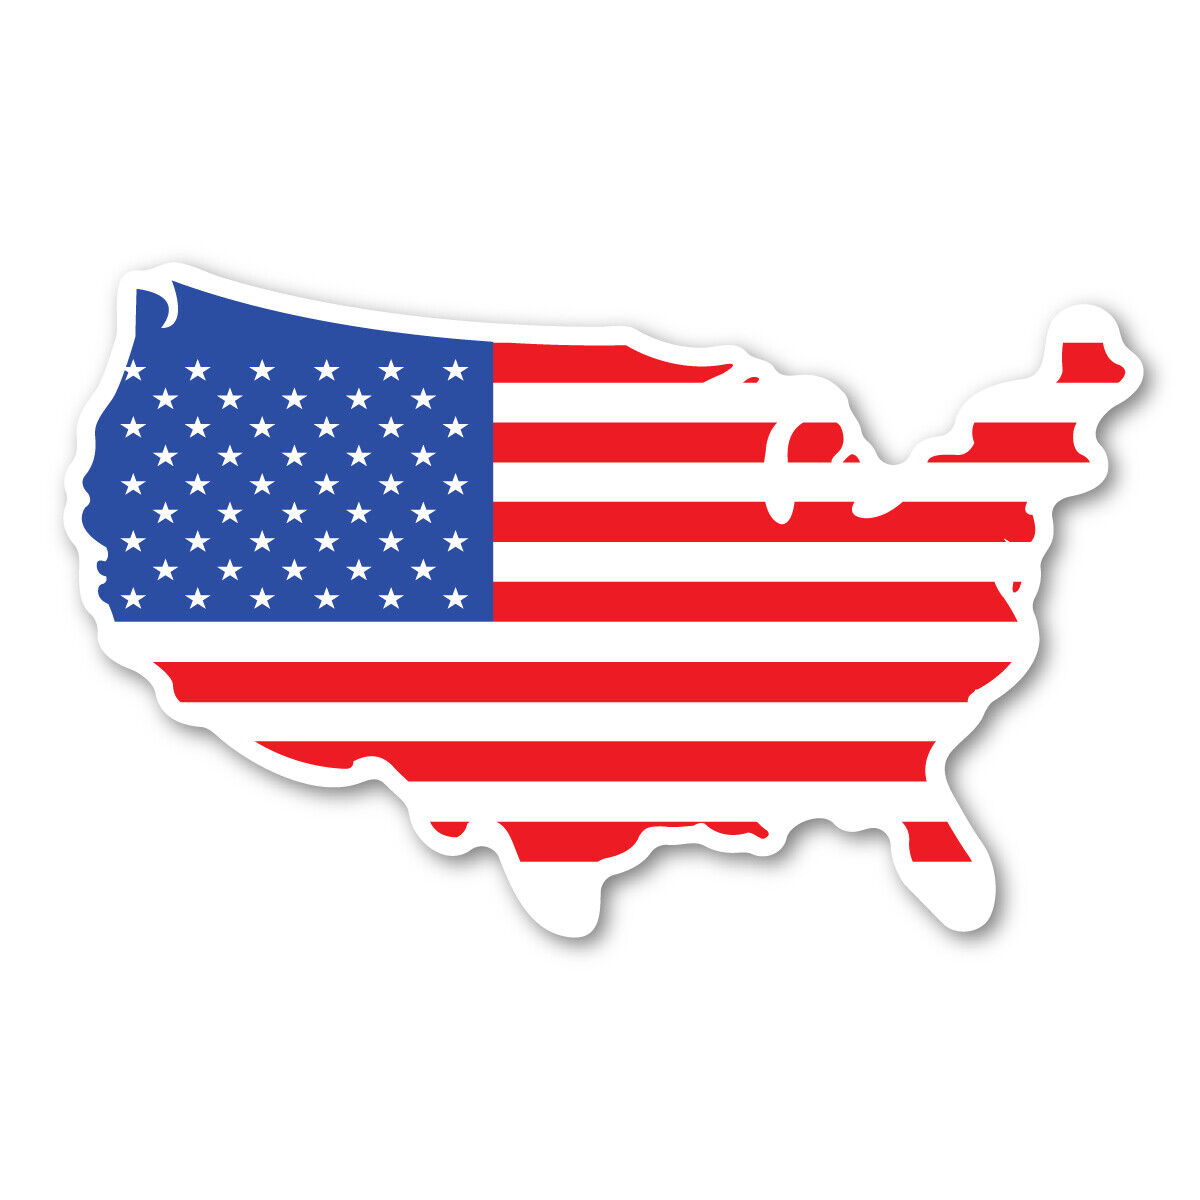 United States Shaped American Flag Magnet